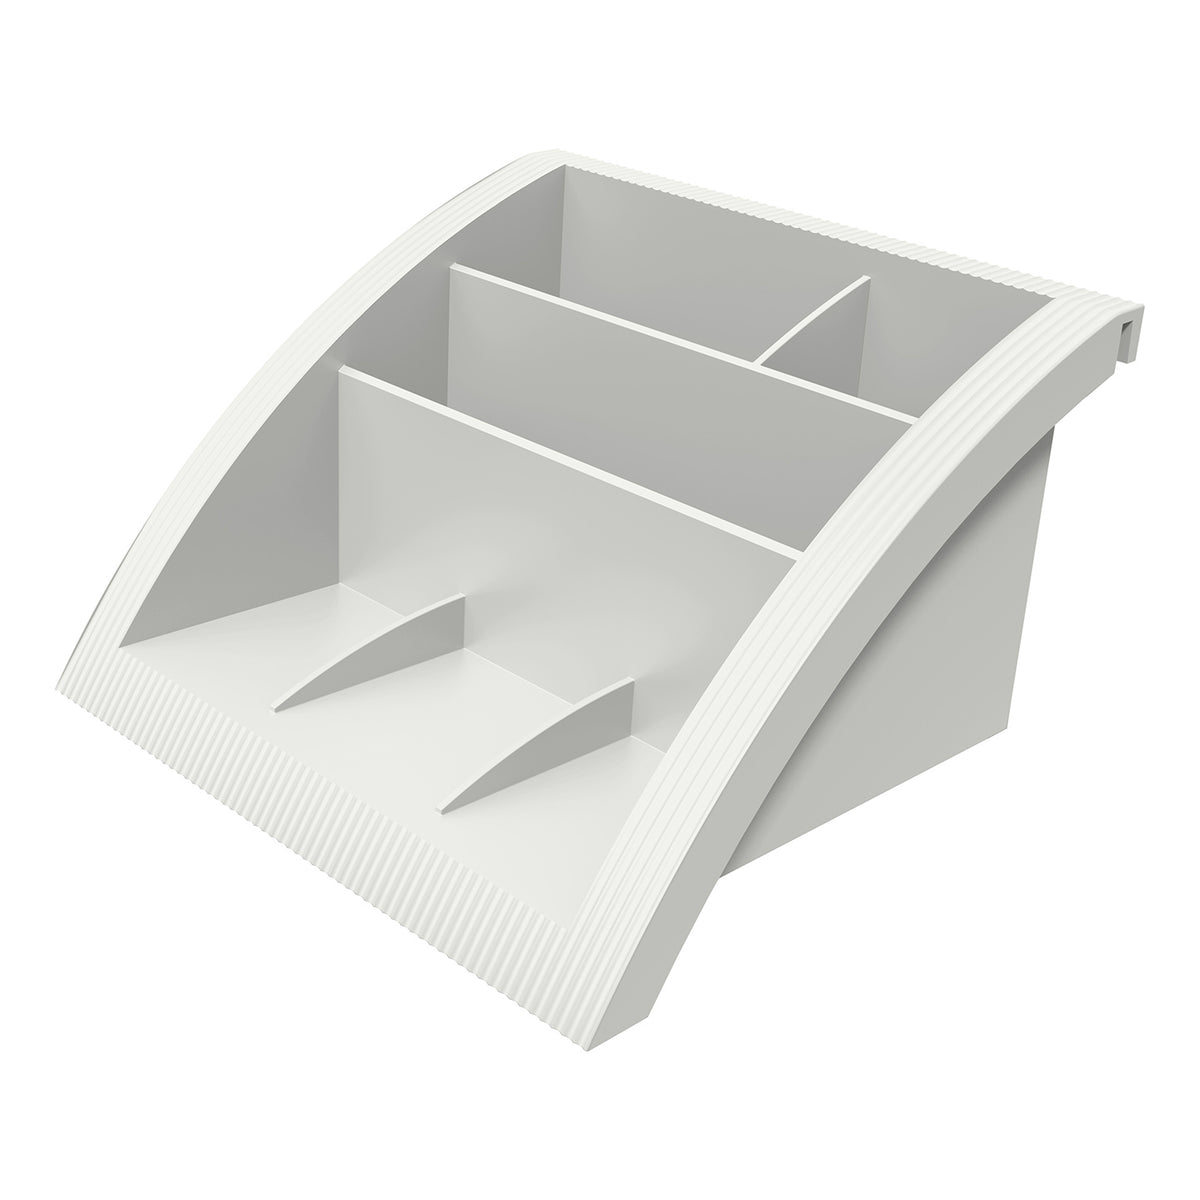 Viewmate utensil tray - option 170